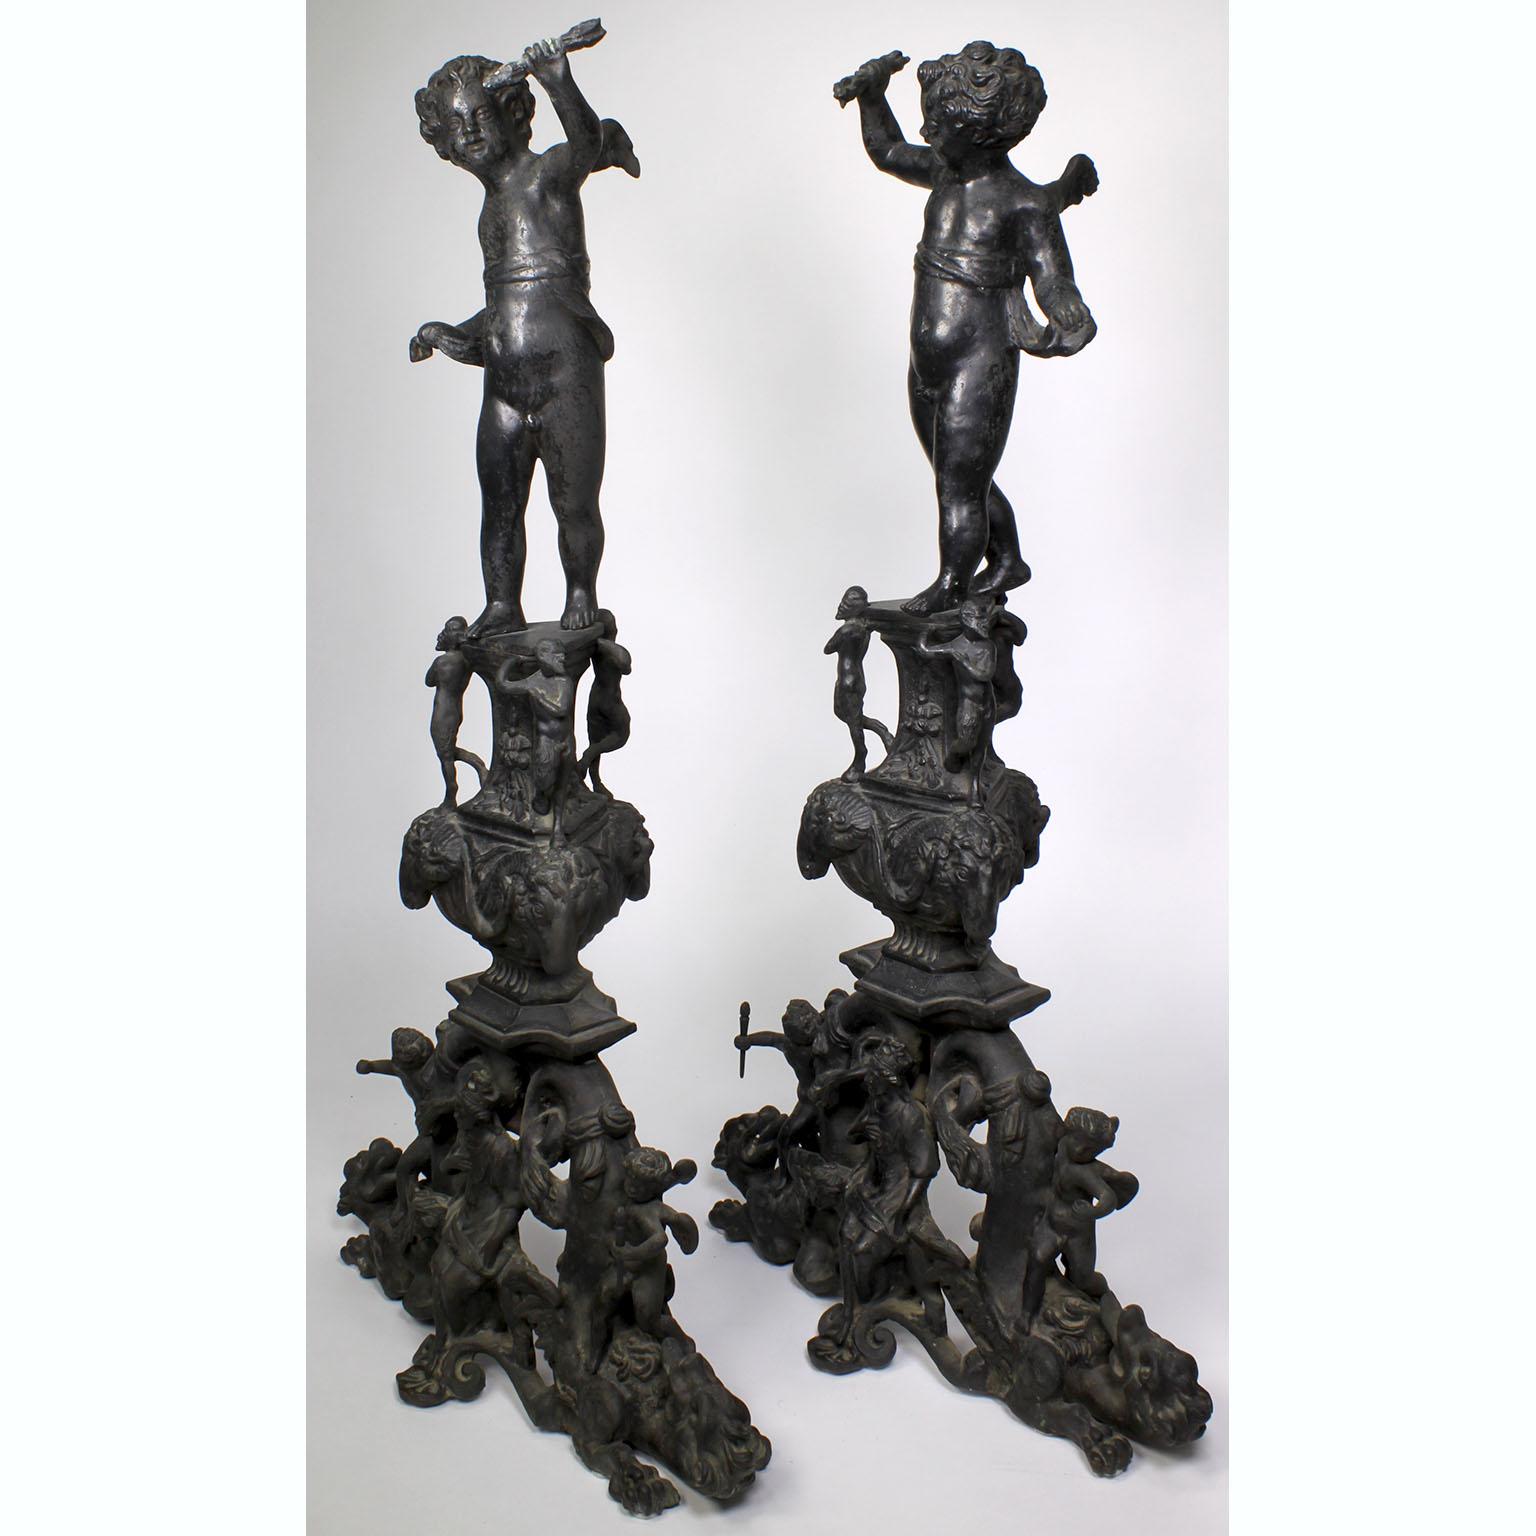 Pair of French 19th-20th century baroque style patinated bronze figural chenets (Andirons). Each chenet topped with a cherub standing on a stand flanked by styrs and royal goat-heads above a scrolled plynth surmounted with two cherubs, a pair of